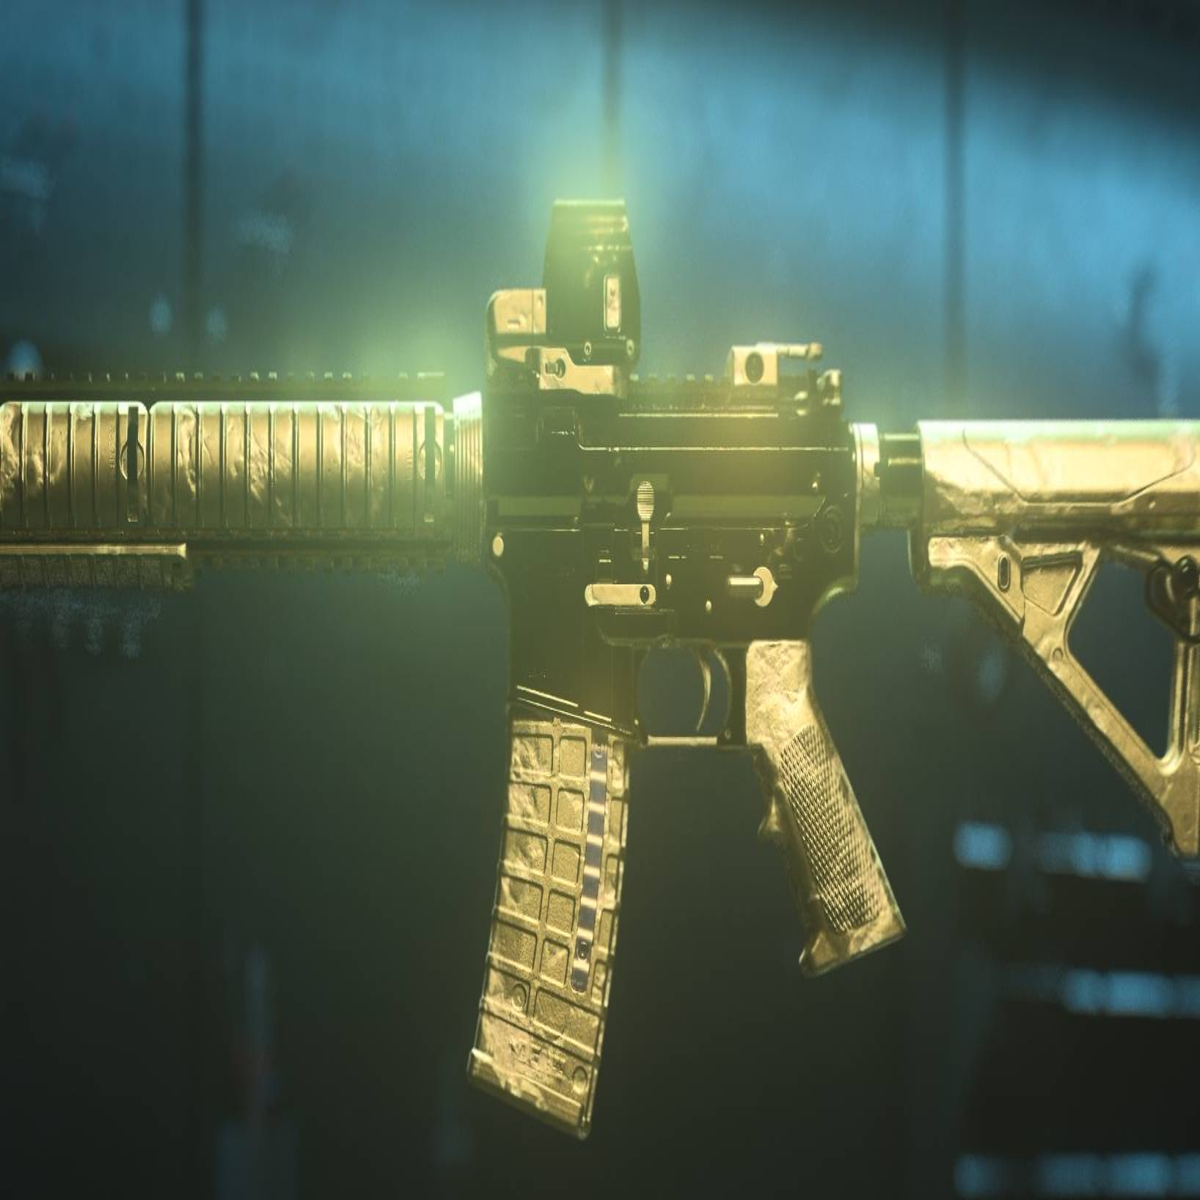 call of duty ghosts gold guns